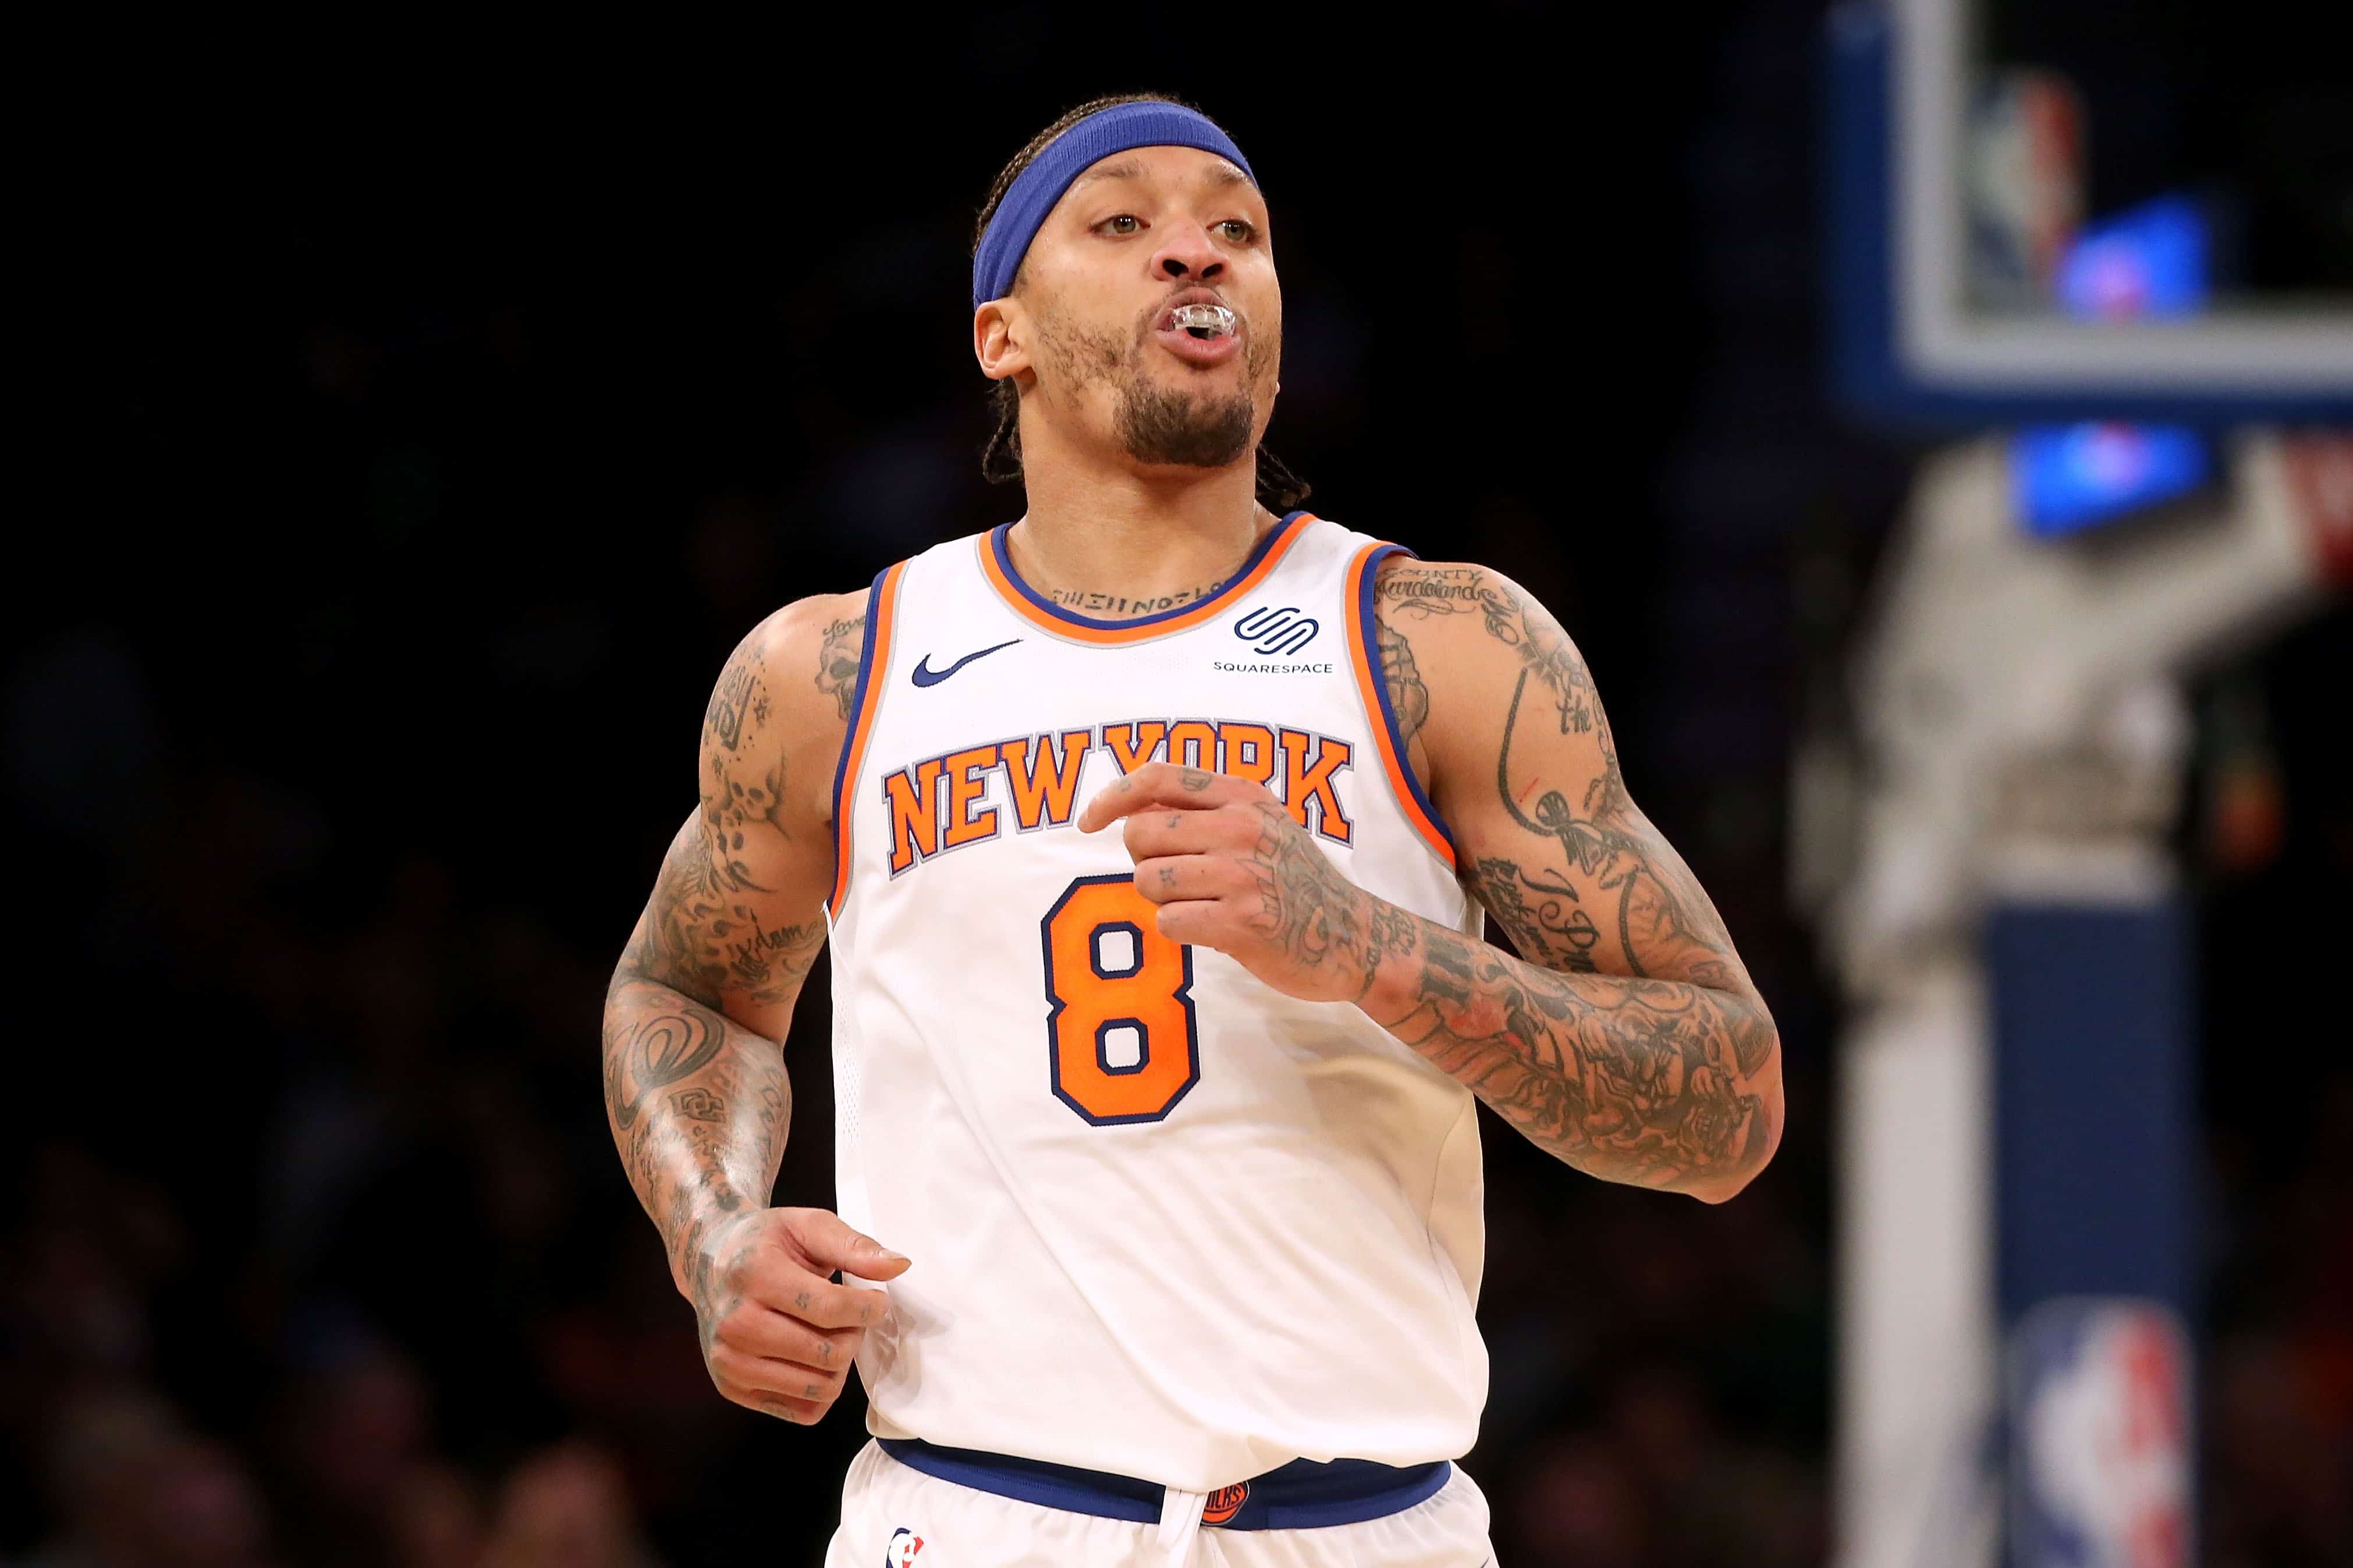 Michael Beasley Scores 32, Pumps Up Team in Postgame Huddle